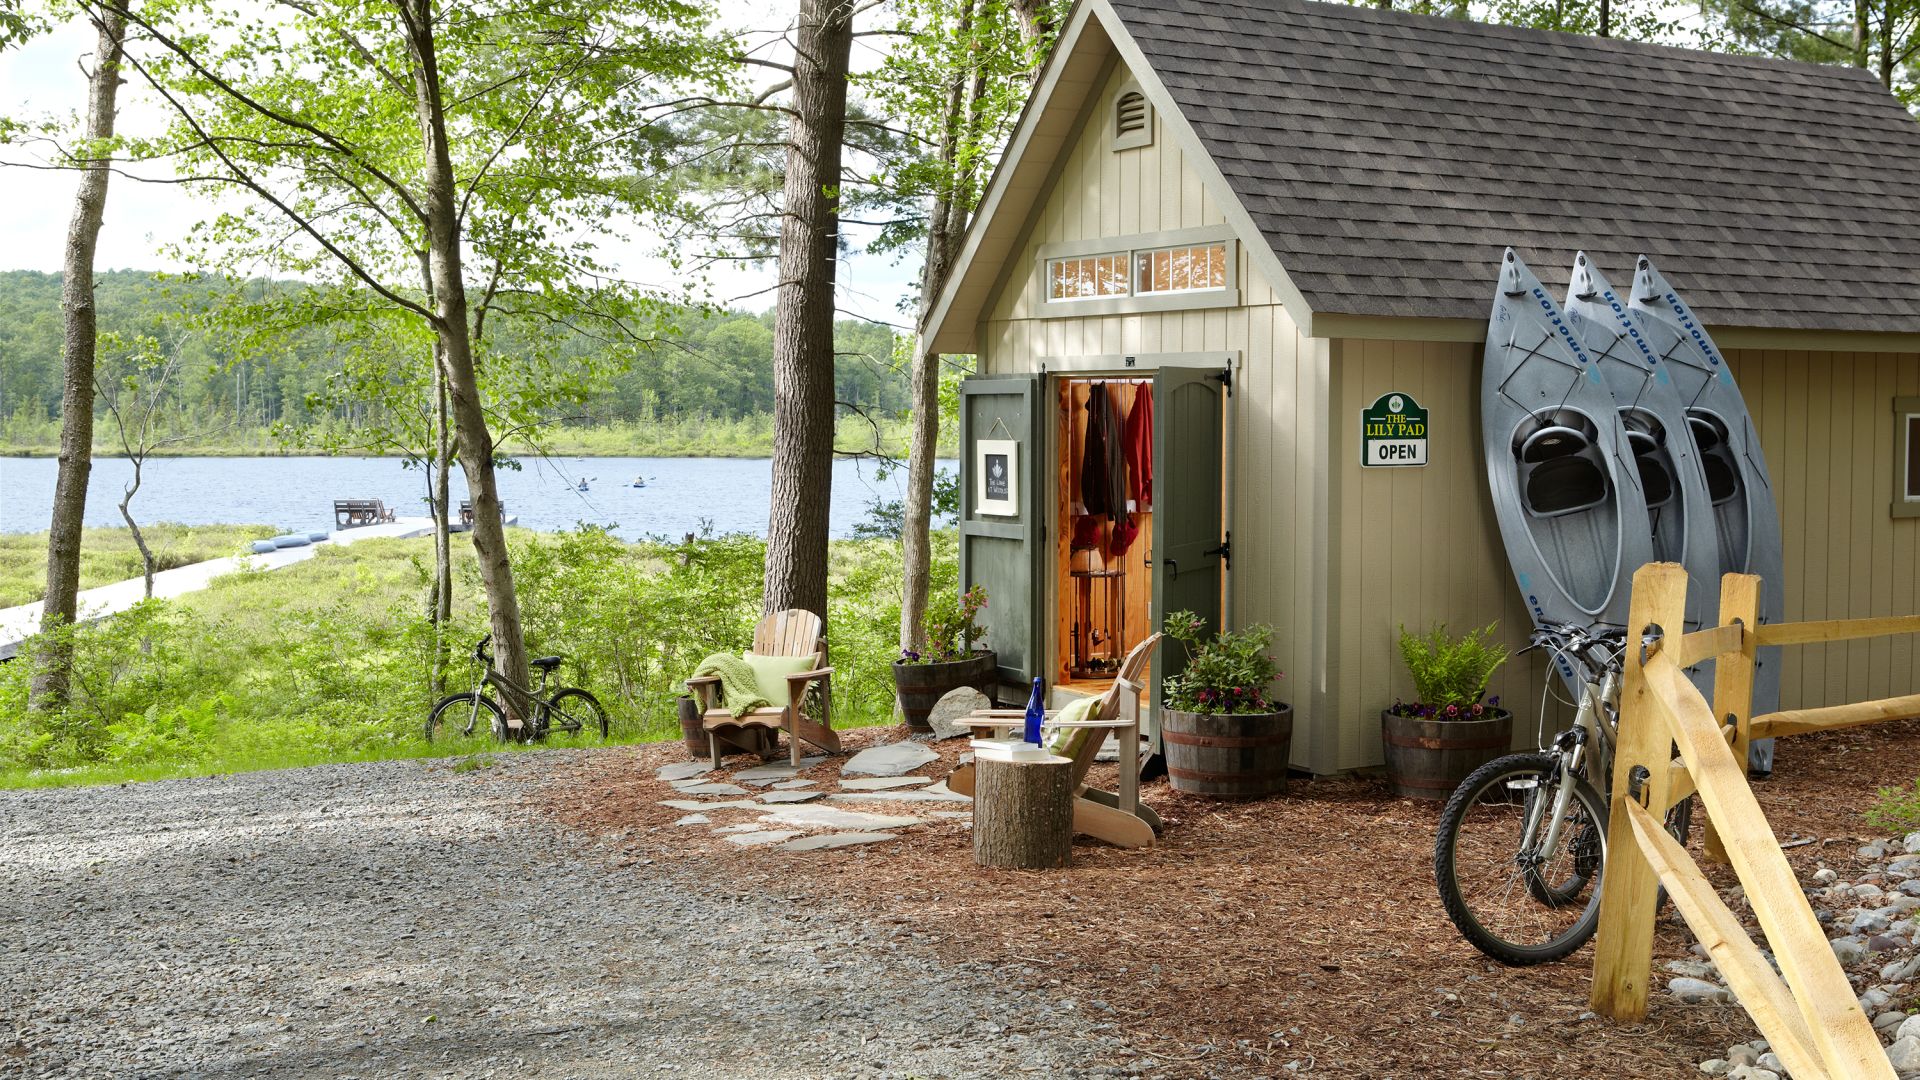 Building with open doors and kayaks, bikes, and outdoor adventure equipment available for use next to the lake